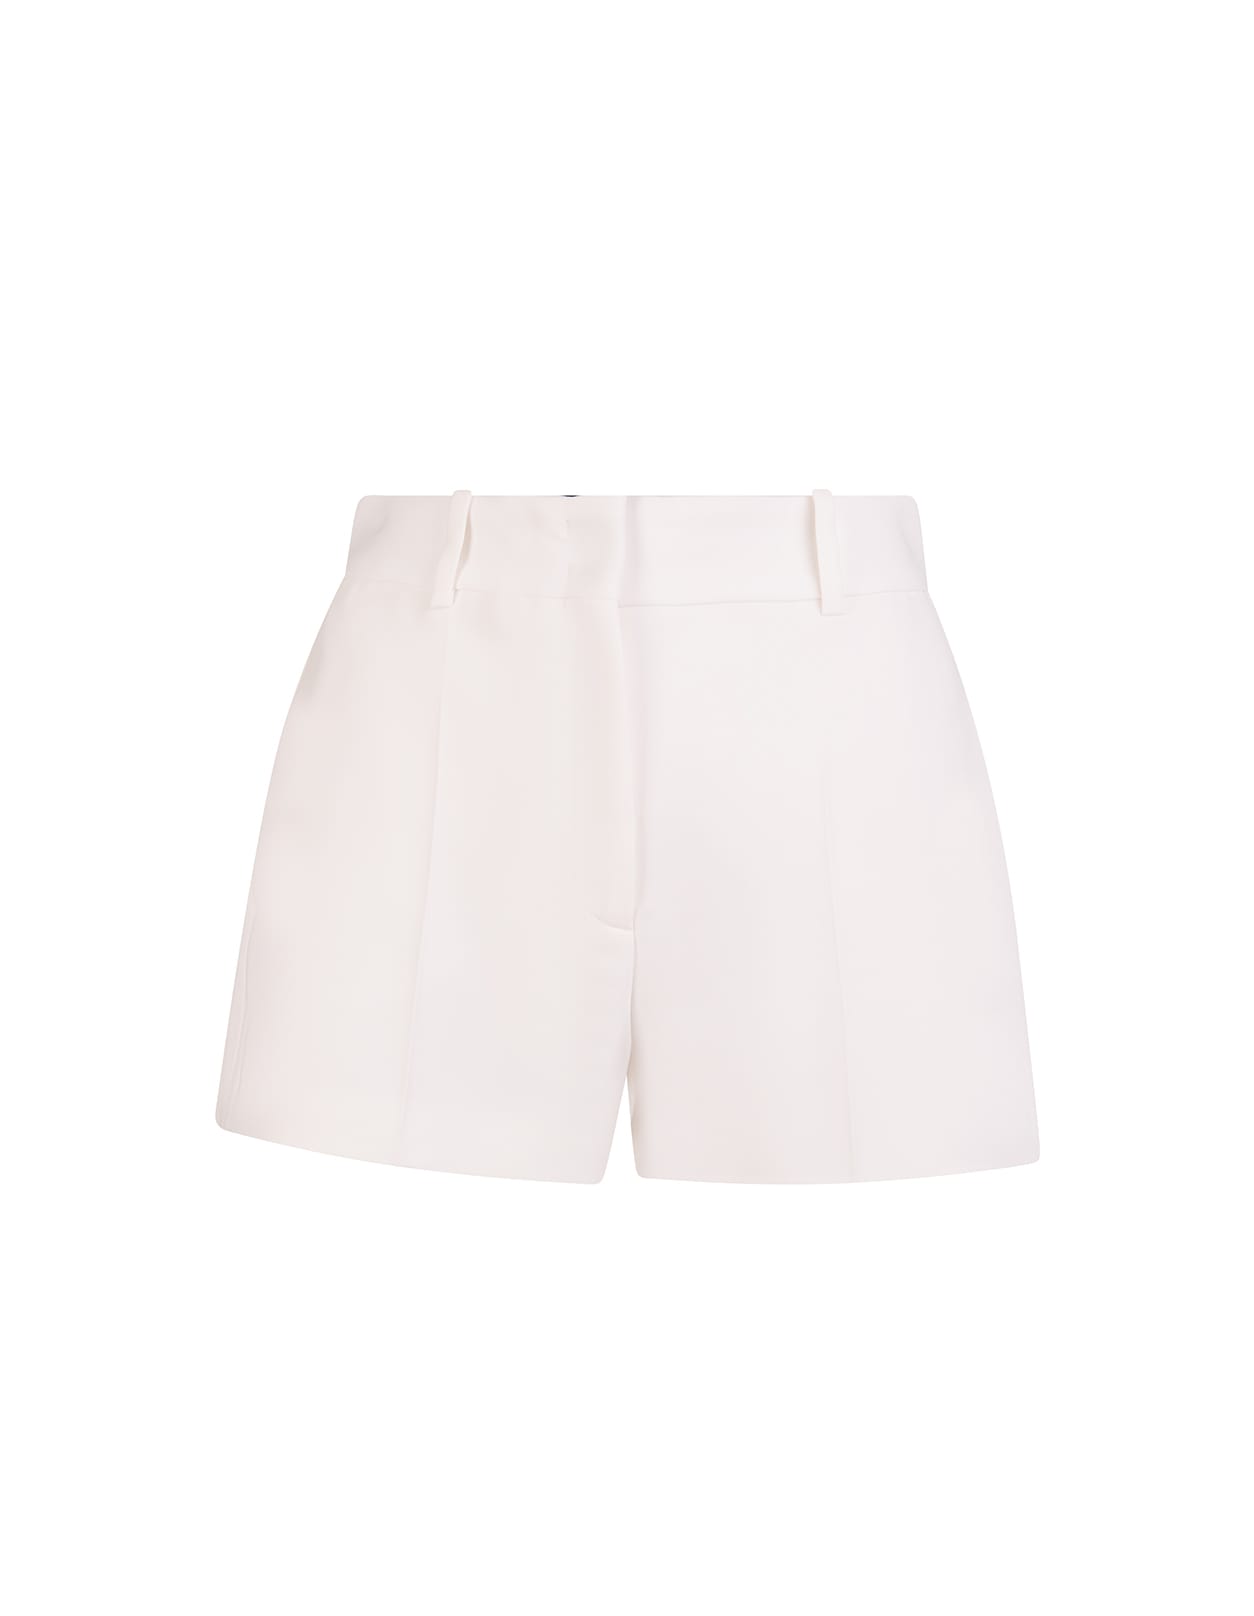 Ermanno Scervino Woman White High Waist Tailored Shorts